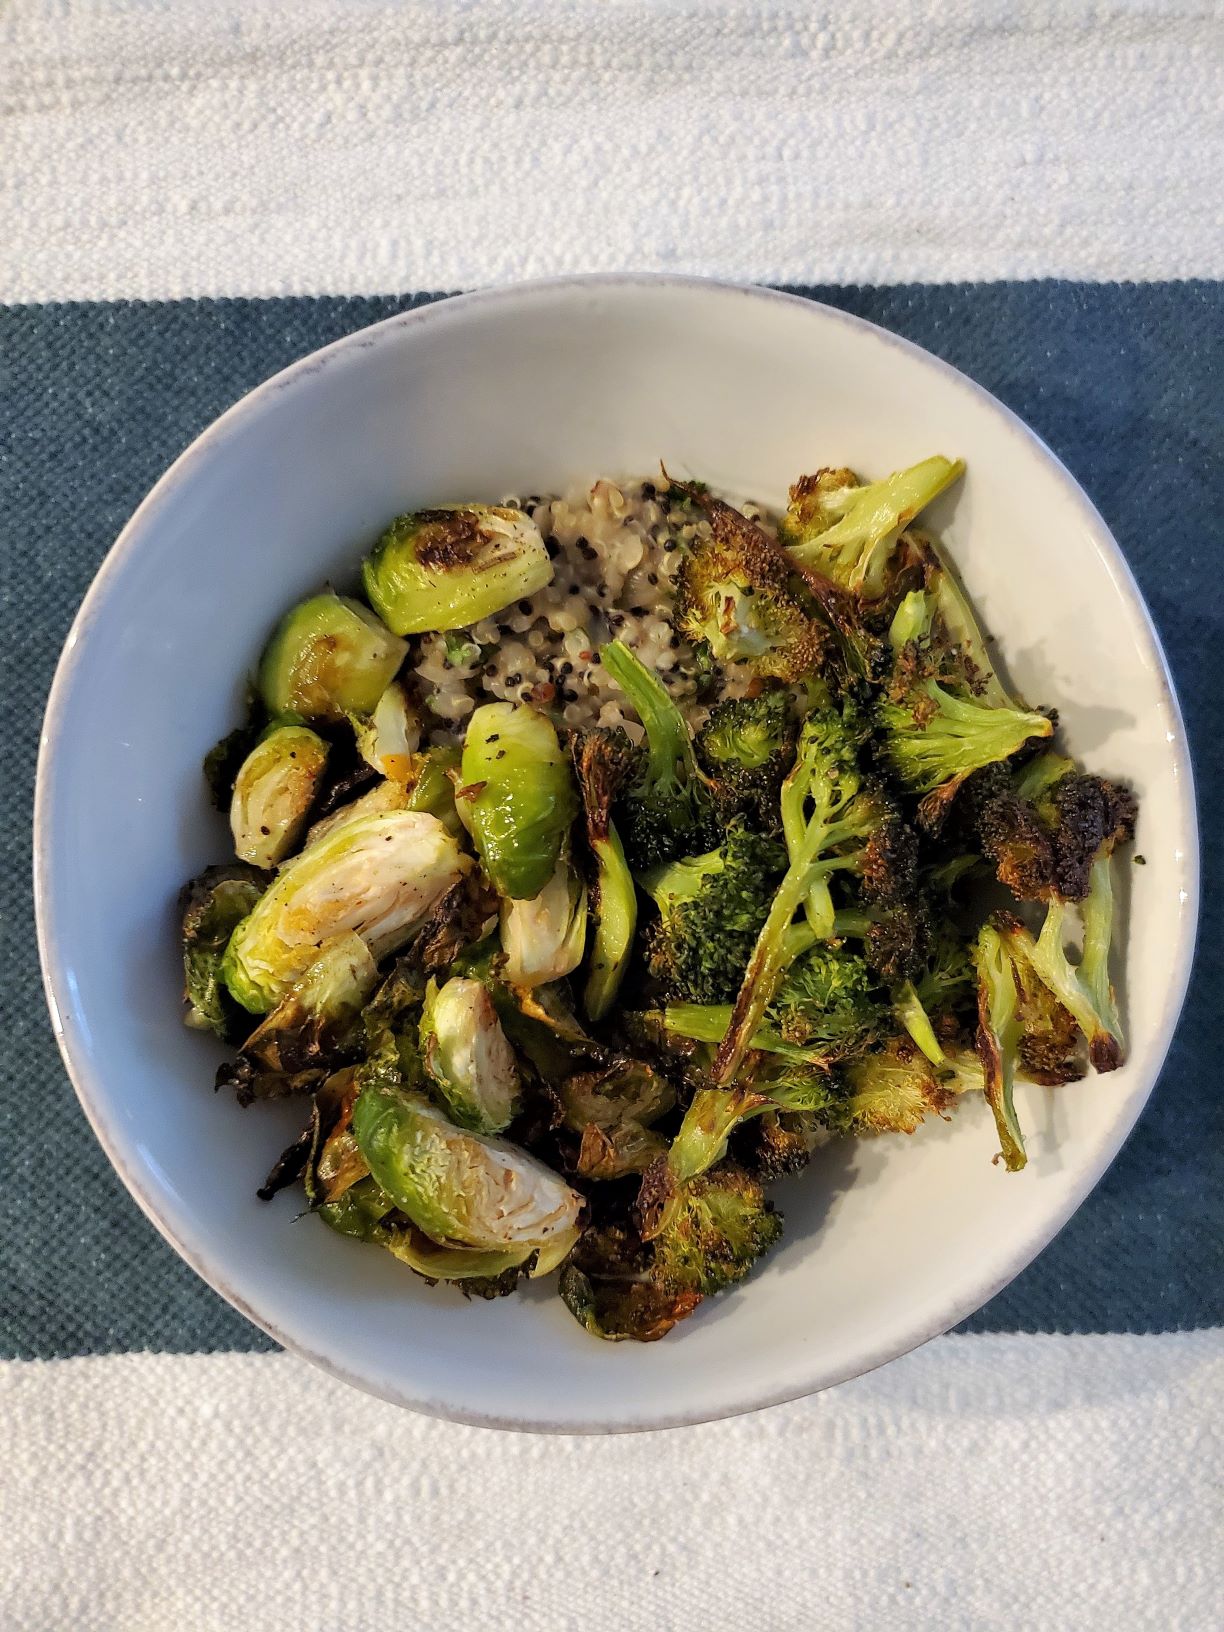 White Bean Quinoa Risotto with Roasted Broccoli and Brussels